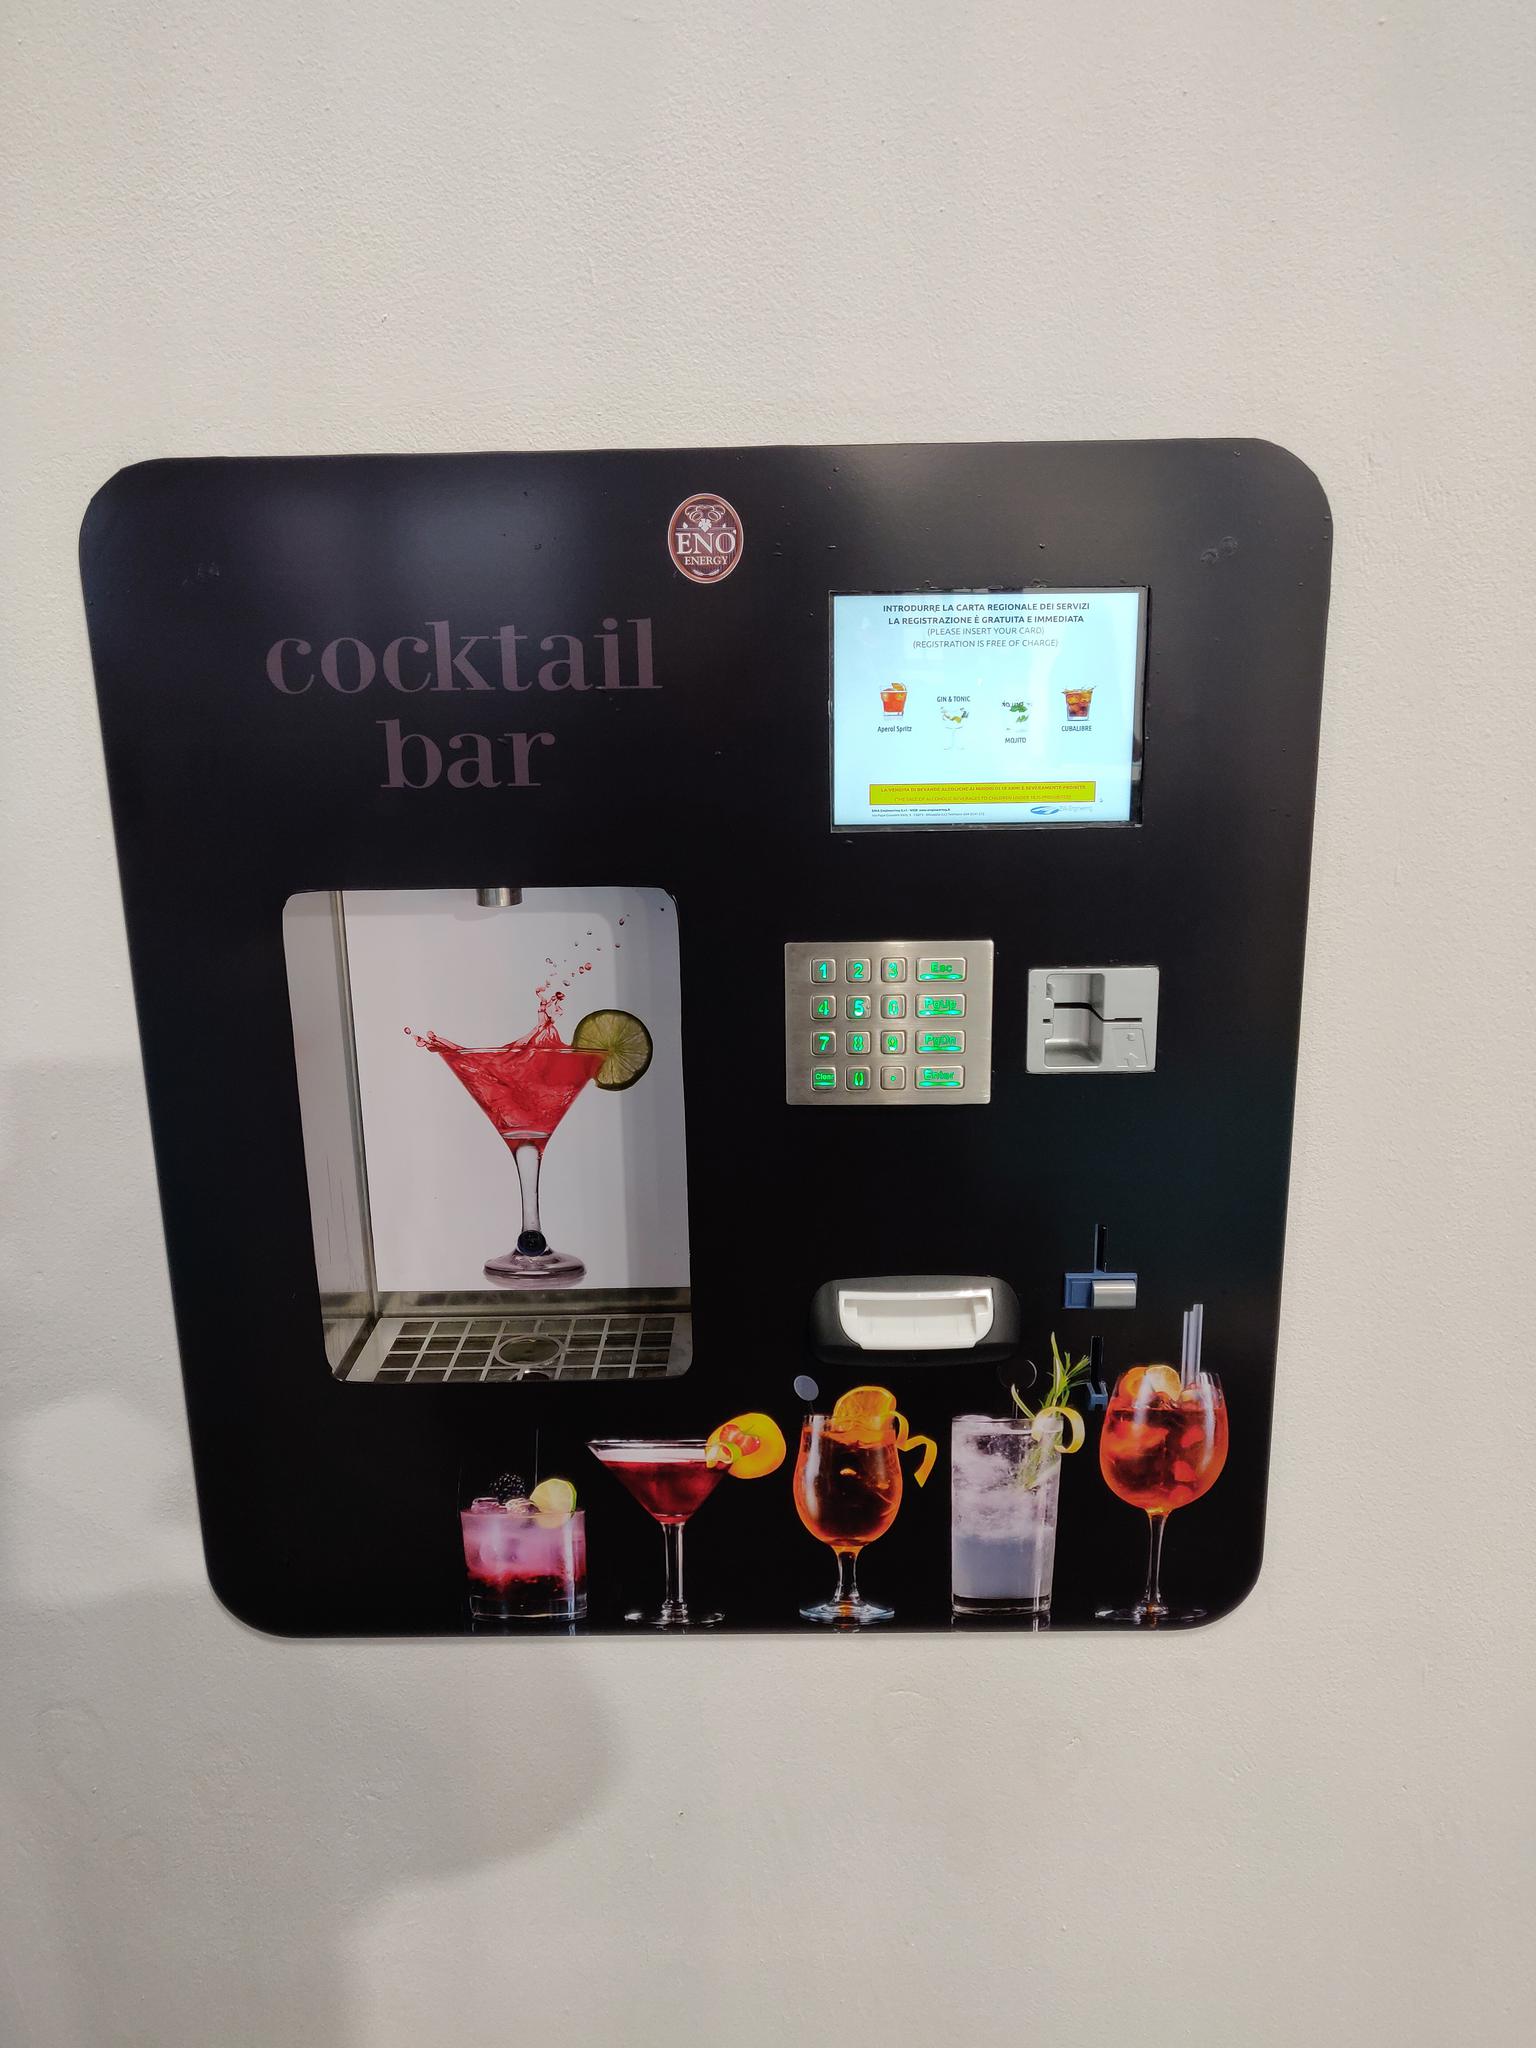 Machine-mixed drinks, cocktails – Glass of Wine Direct